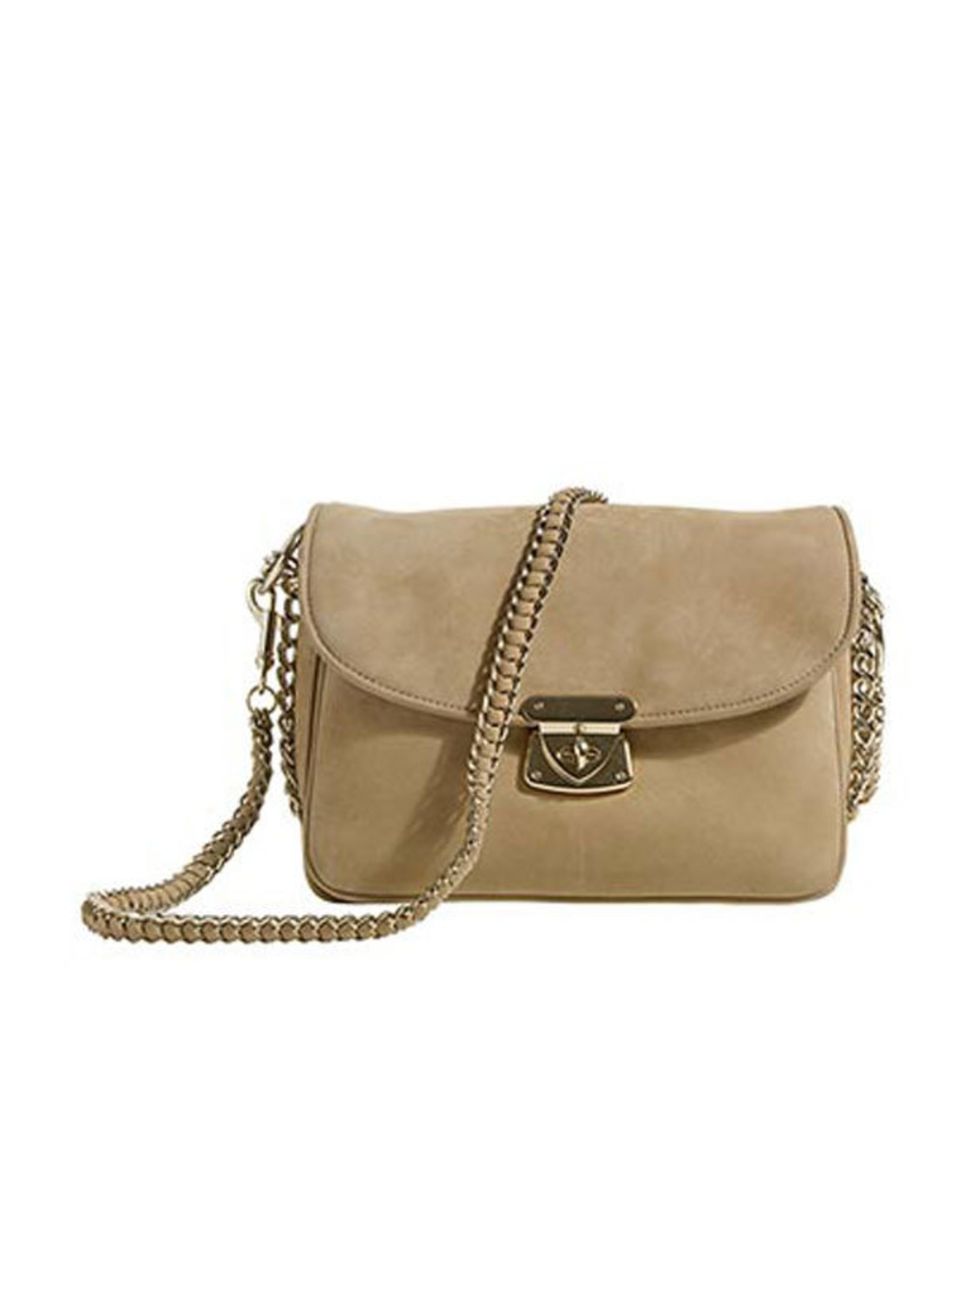 <p>We instantly fell for this nude suede bag. A timeless classic and perfect for channelling autumns ladylike vibe. <a href="http://www.reissonline.com/shop/womens/womens_new_arrivals/duke/tan/">Reiss</a> leather bag, £179 </p>